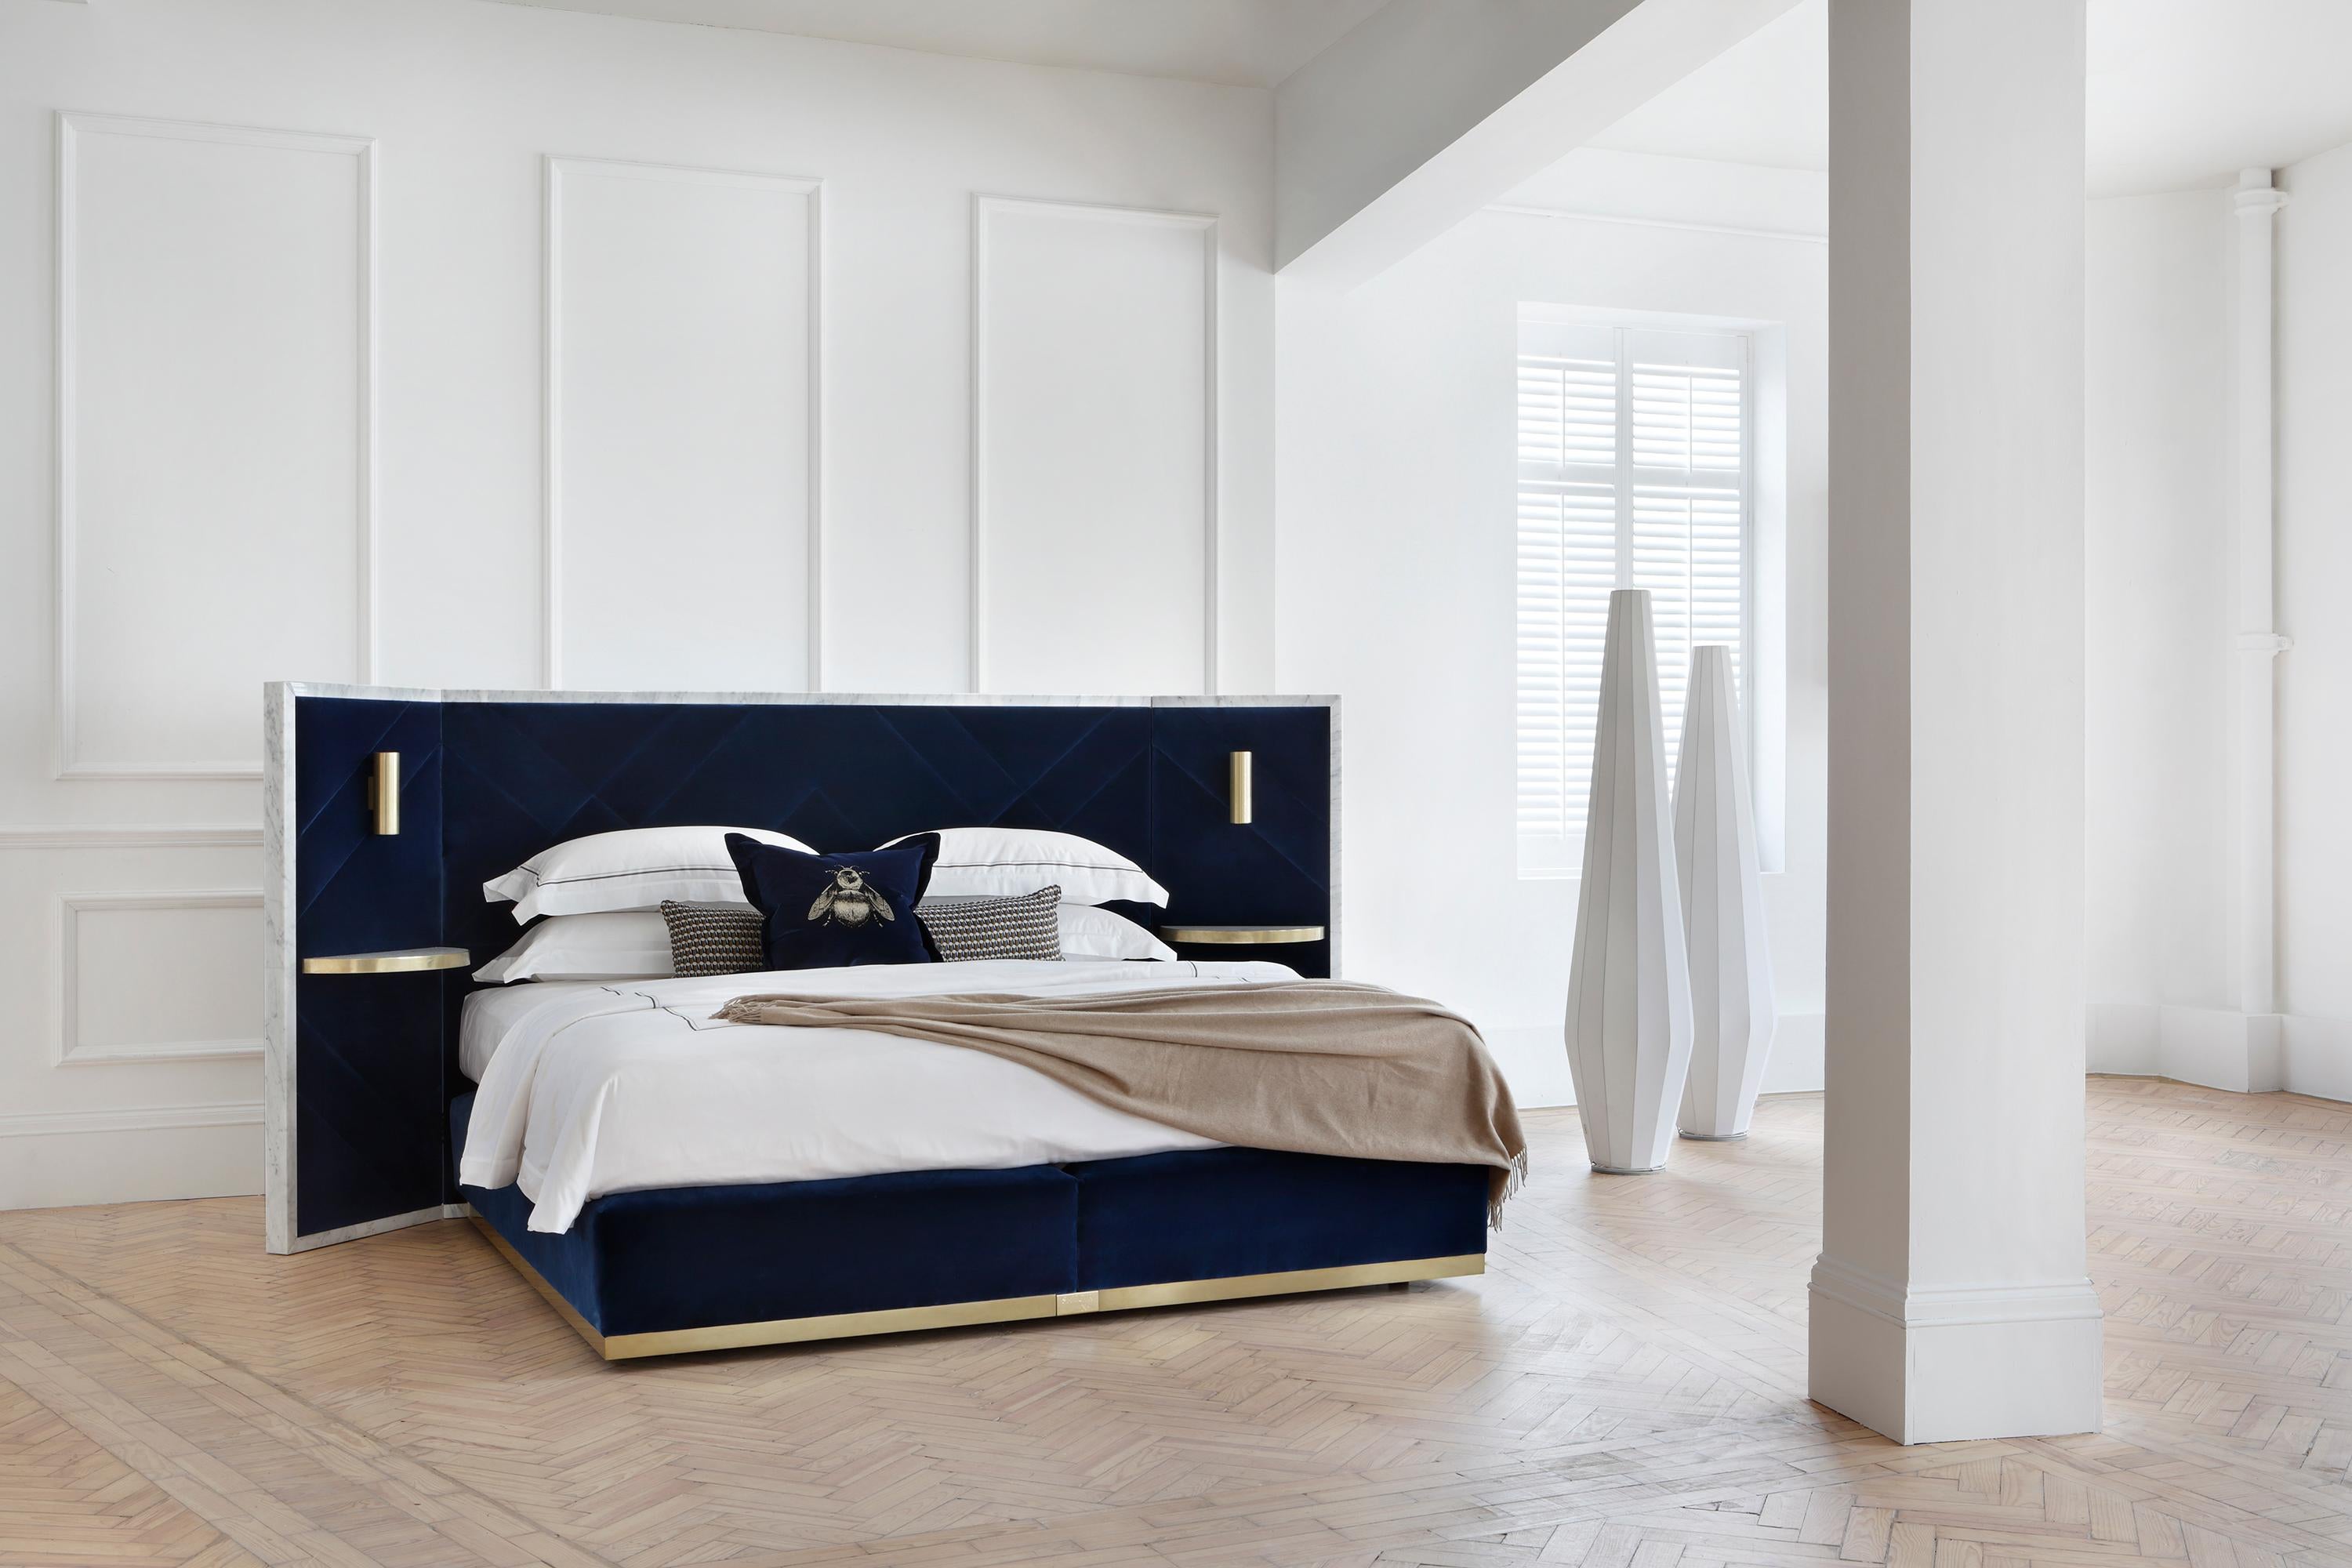 Incorporating over 100 years' experience of crafting bespoke beds, every detail of the Rocco is carefully considered. The hand-selected Carrara marble surround and upholstered geometric panelling combine with the Savoir Nº1 bed set and HKy topper to